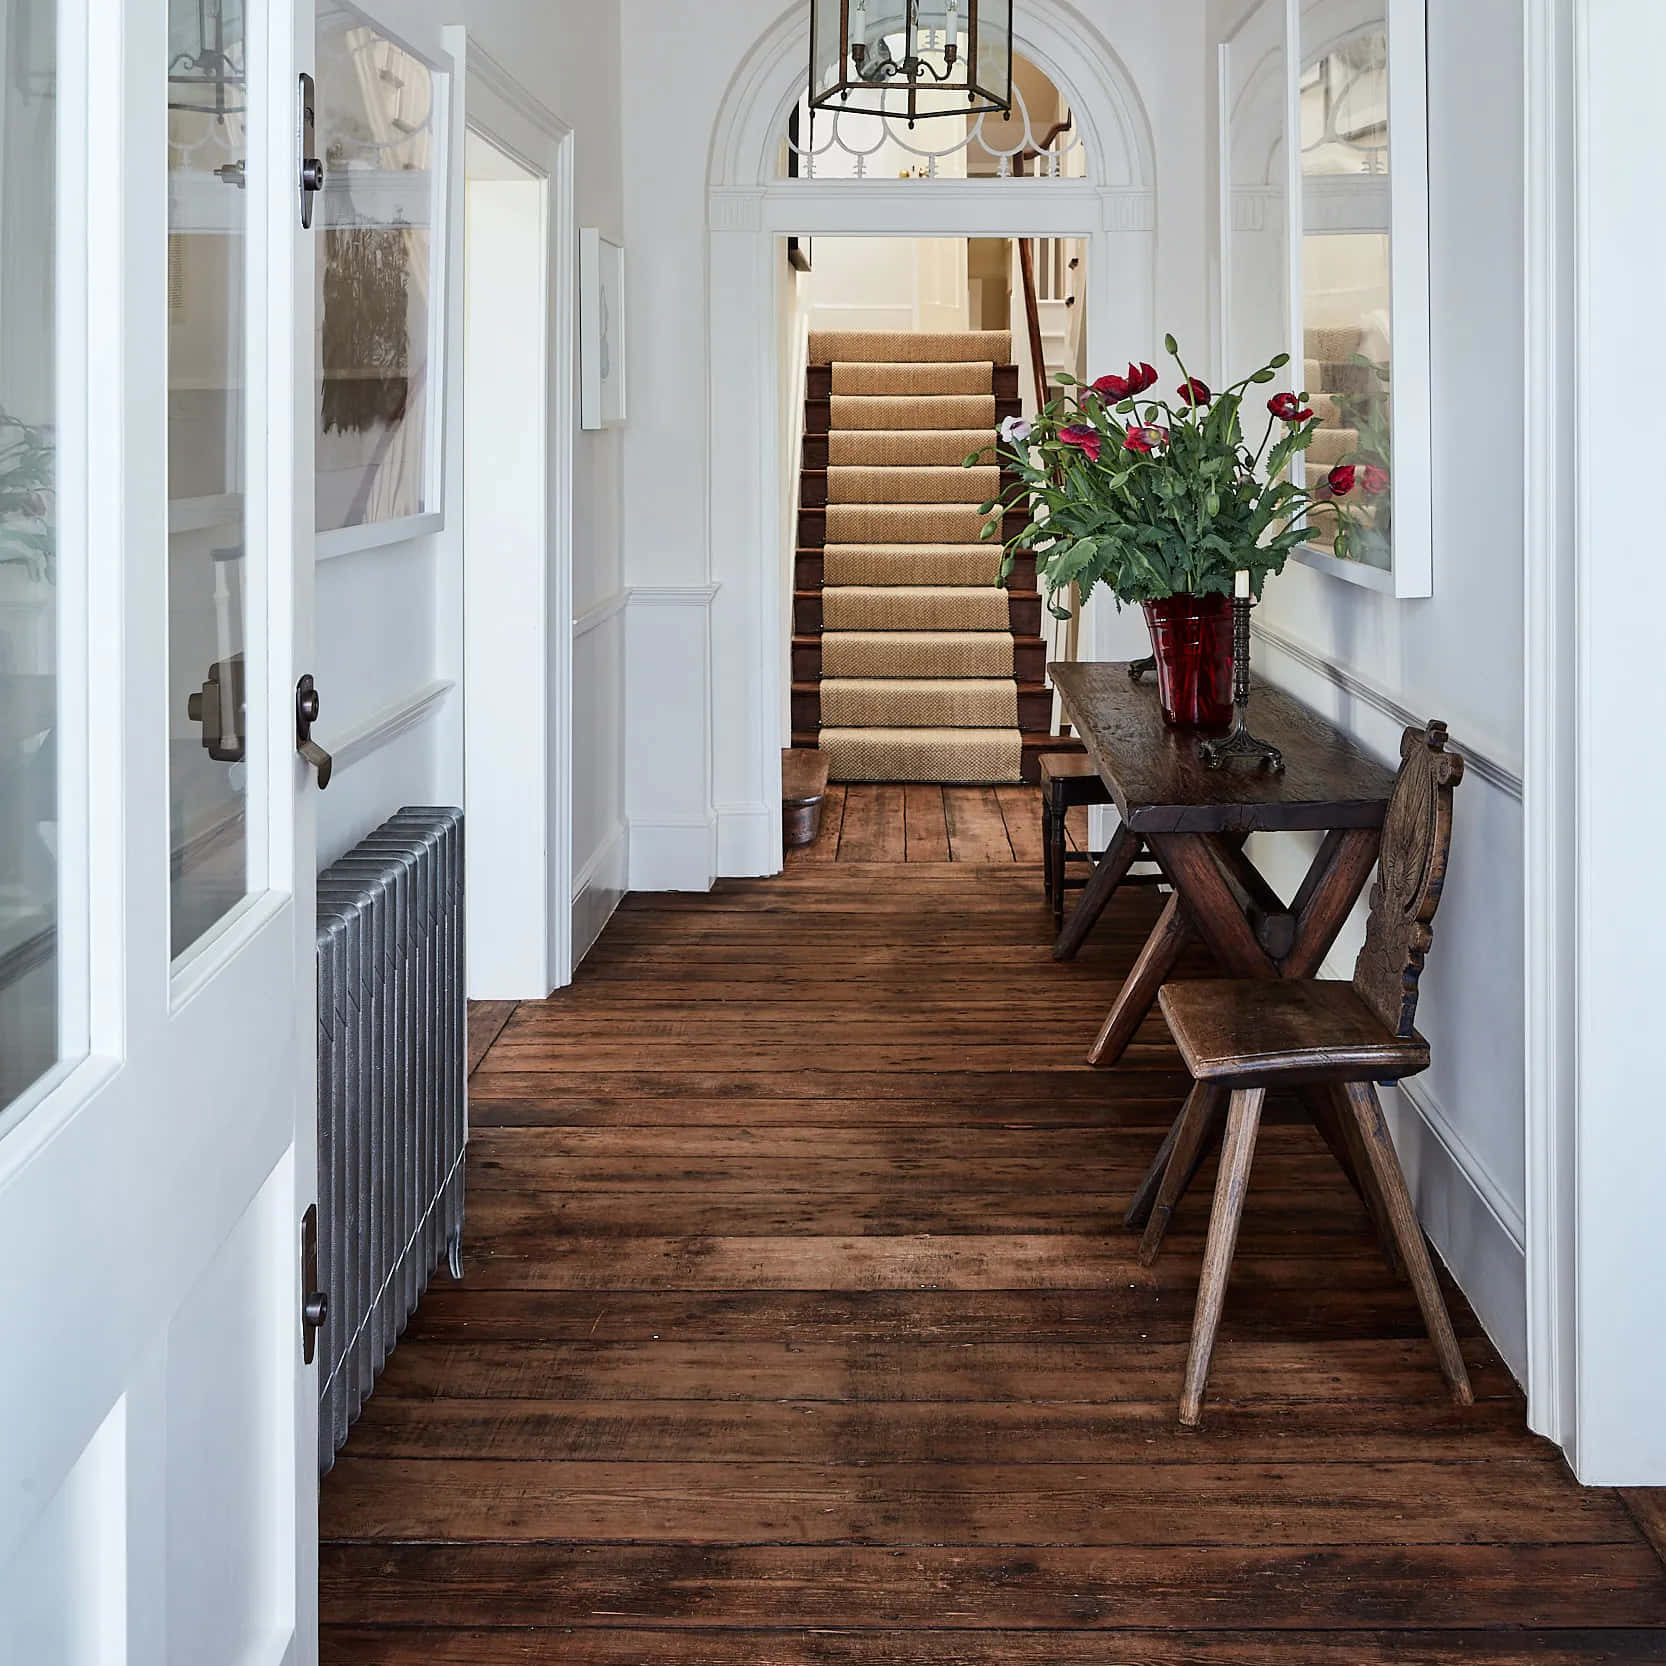 A Hallway With Wooden Floors And A Staircase